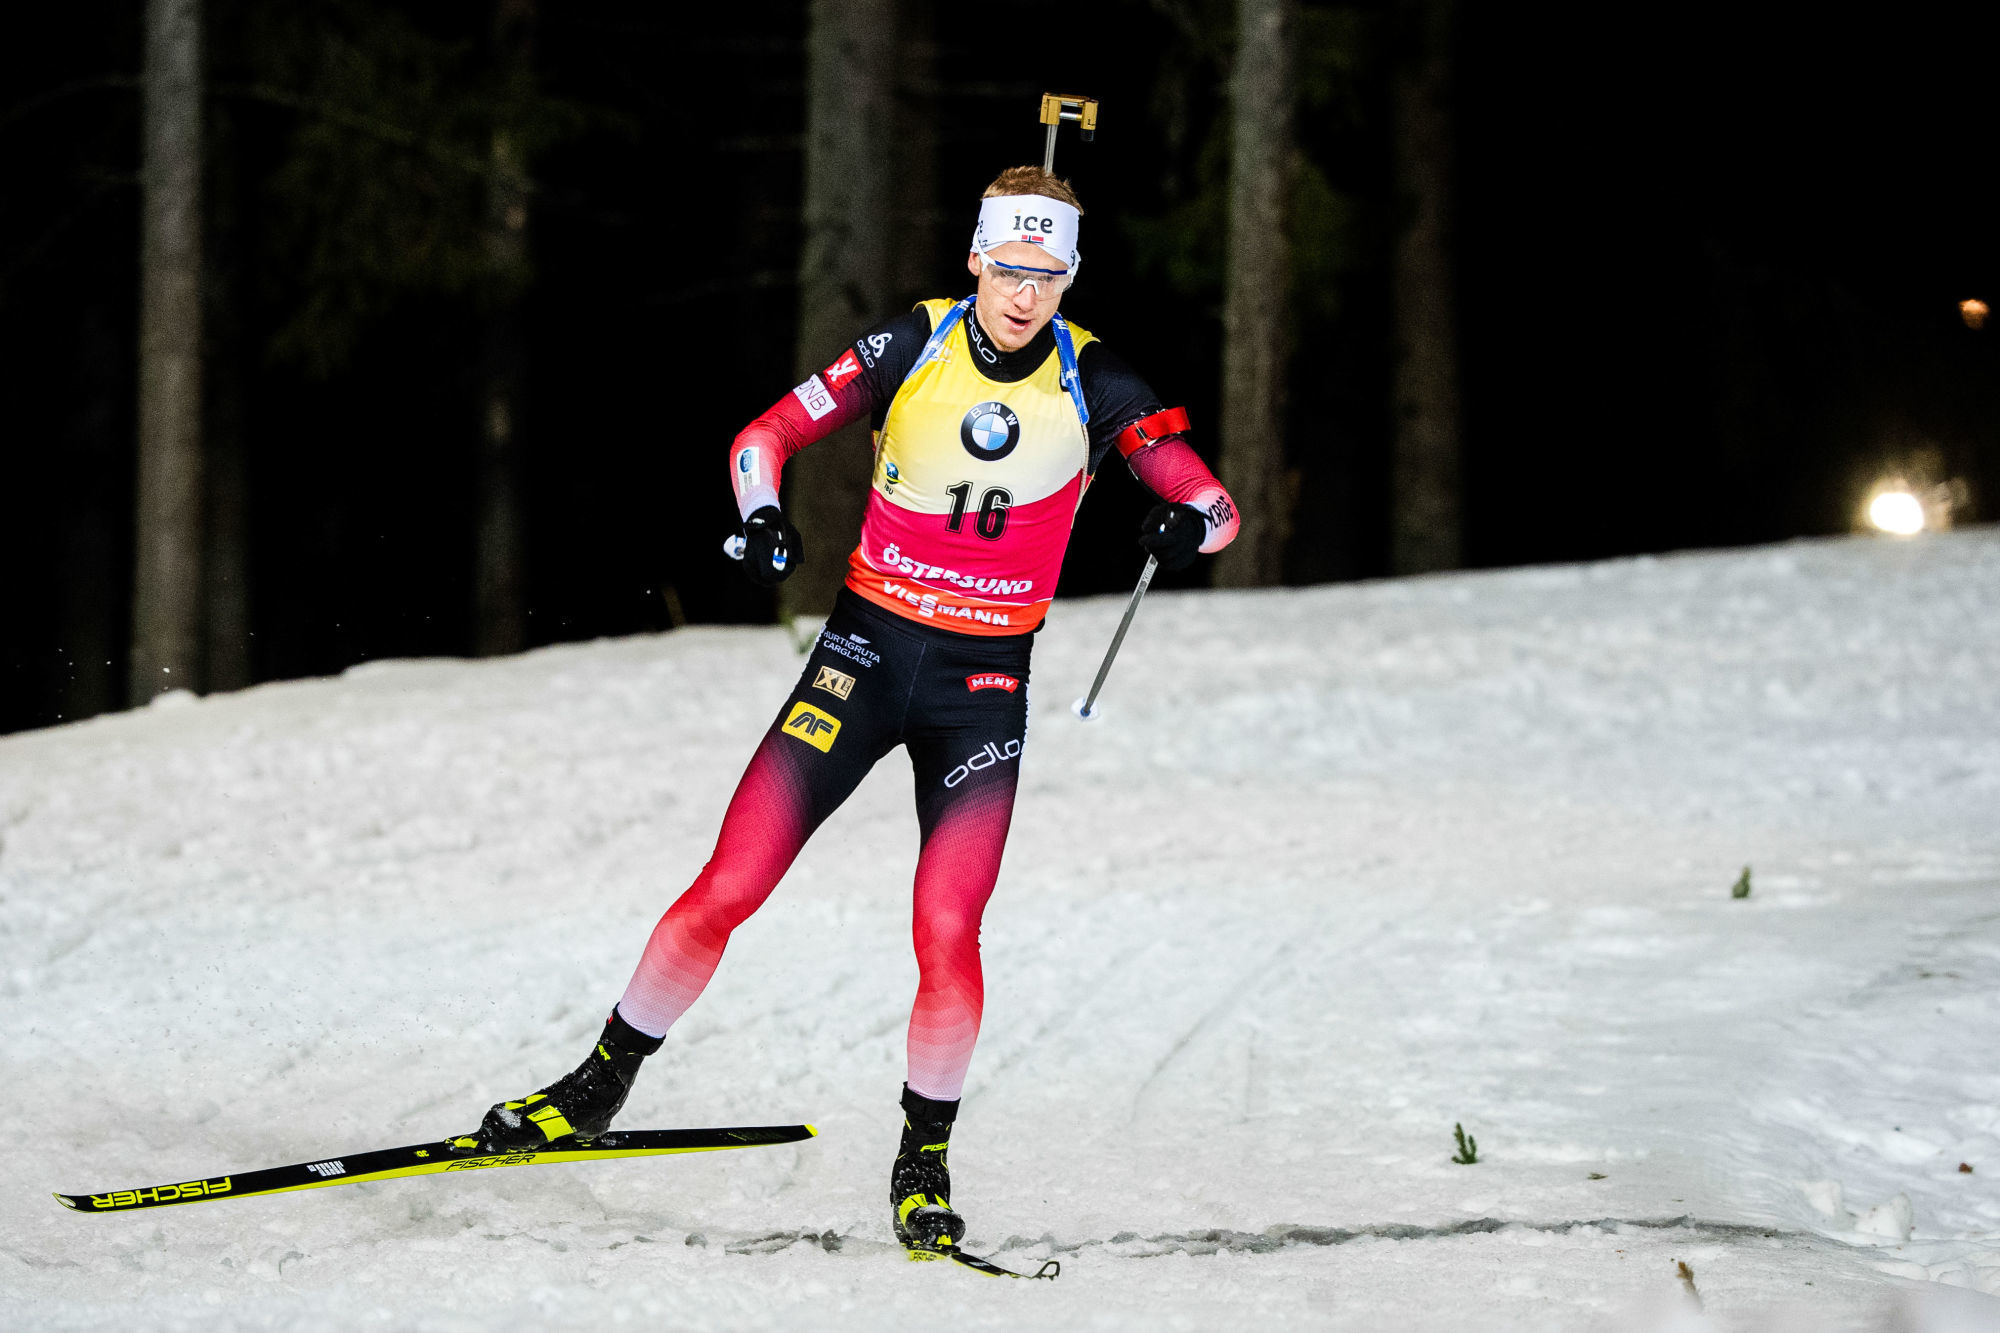 191204  Johannes Thingnes Bø of Norway competes in the Men's 20 km Individual during the IBU World Cup Biathlon on December 04, 2019 in Östersund.
Photo: Johanna Lundberg / BILDBYRÅN / 136085 

Photo by Icon Sport - Johannes Thingnes BOE - Ostersund (Suede)